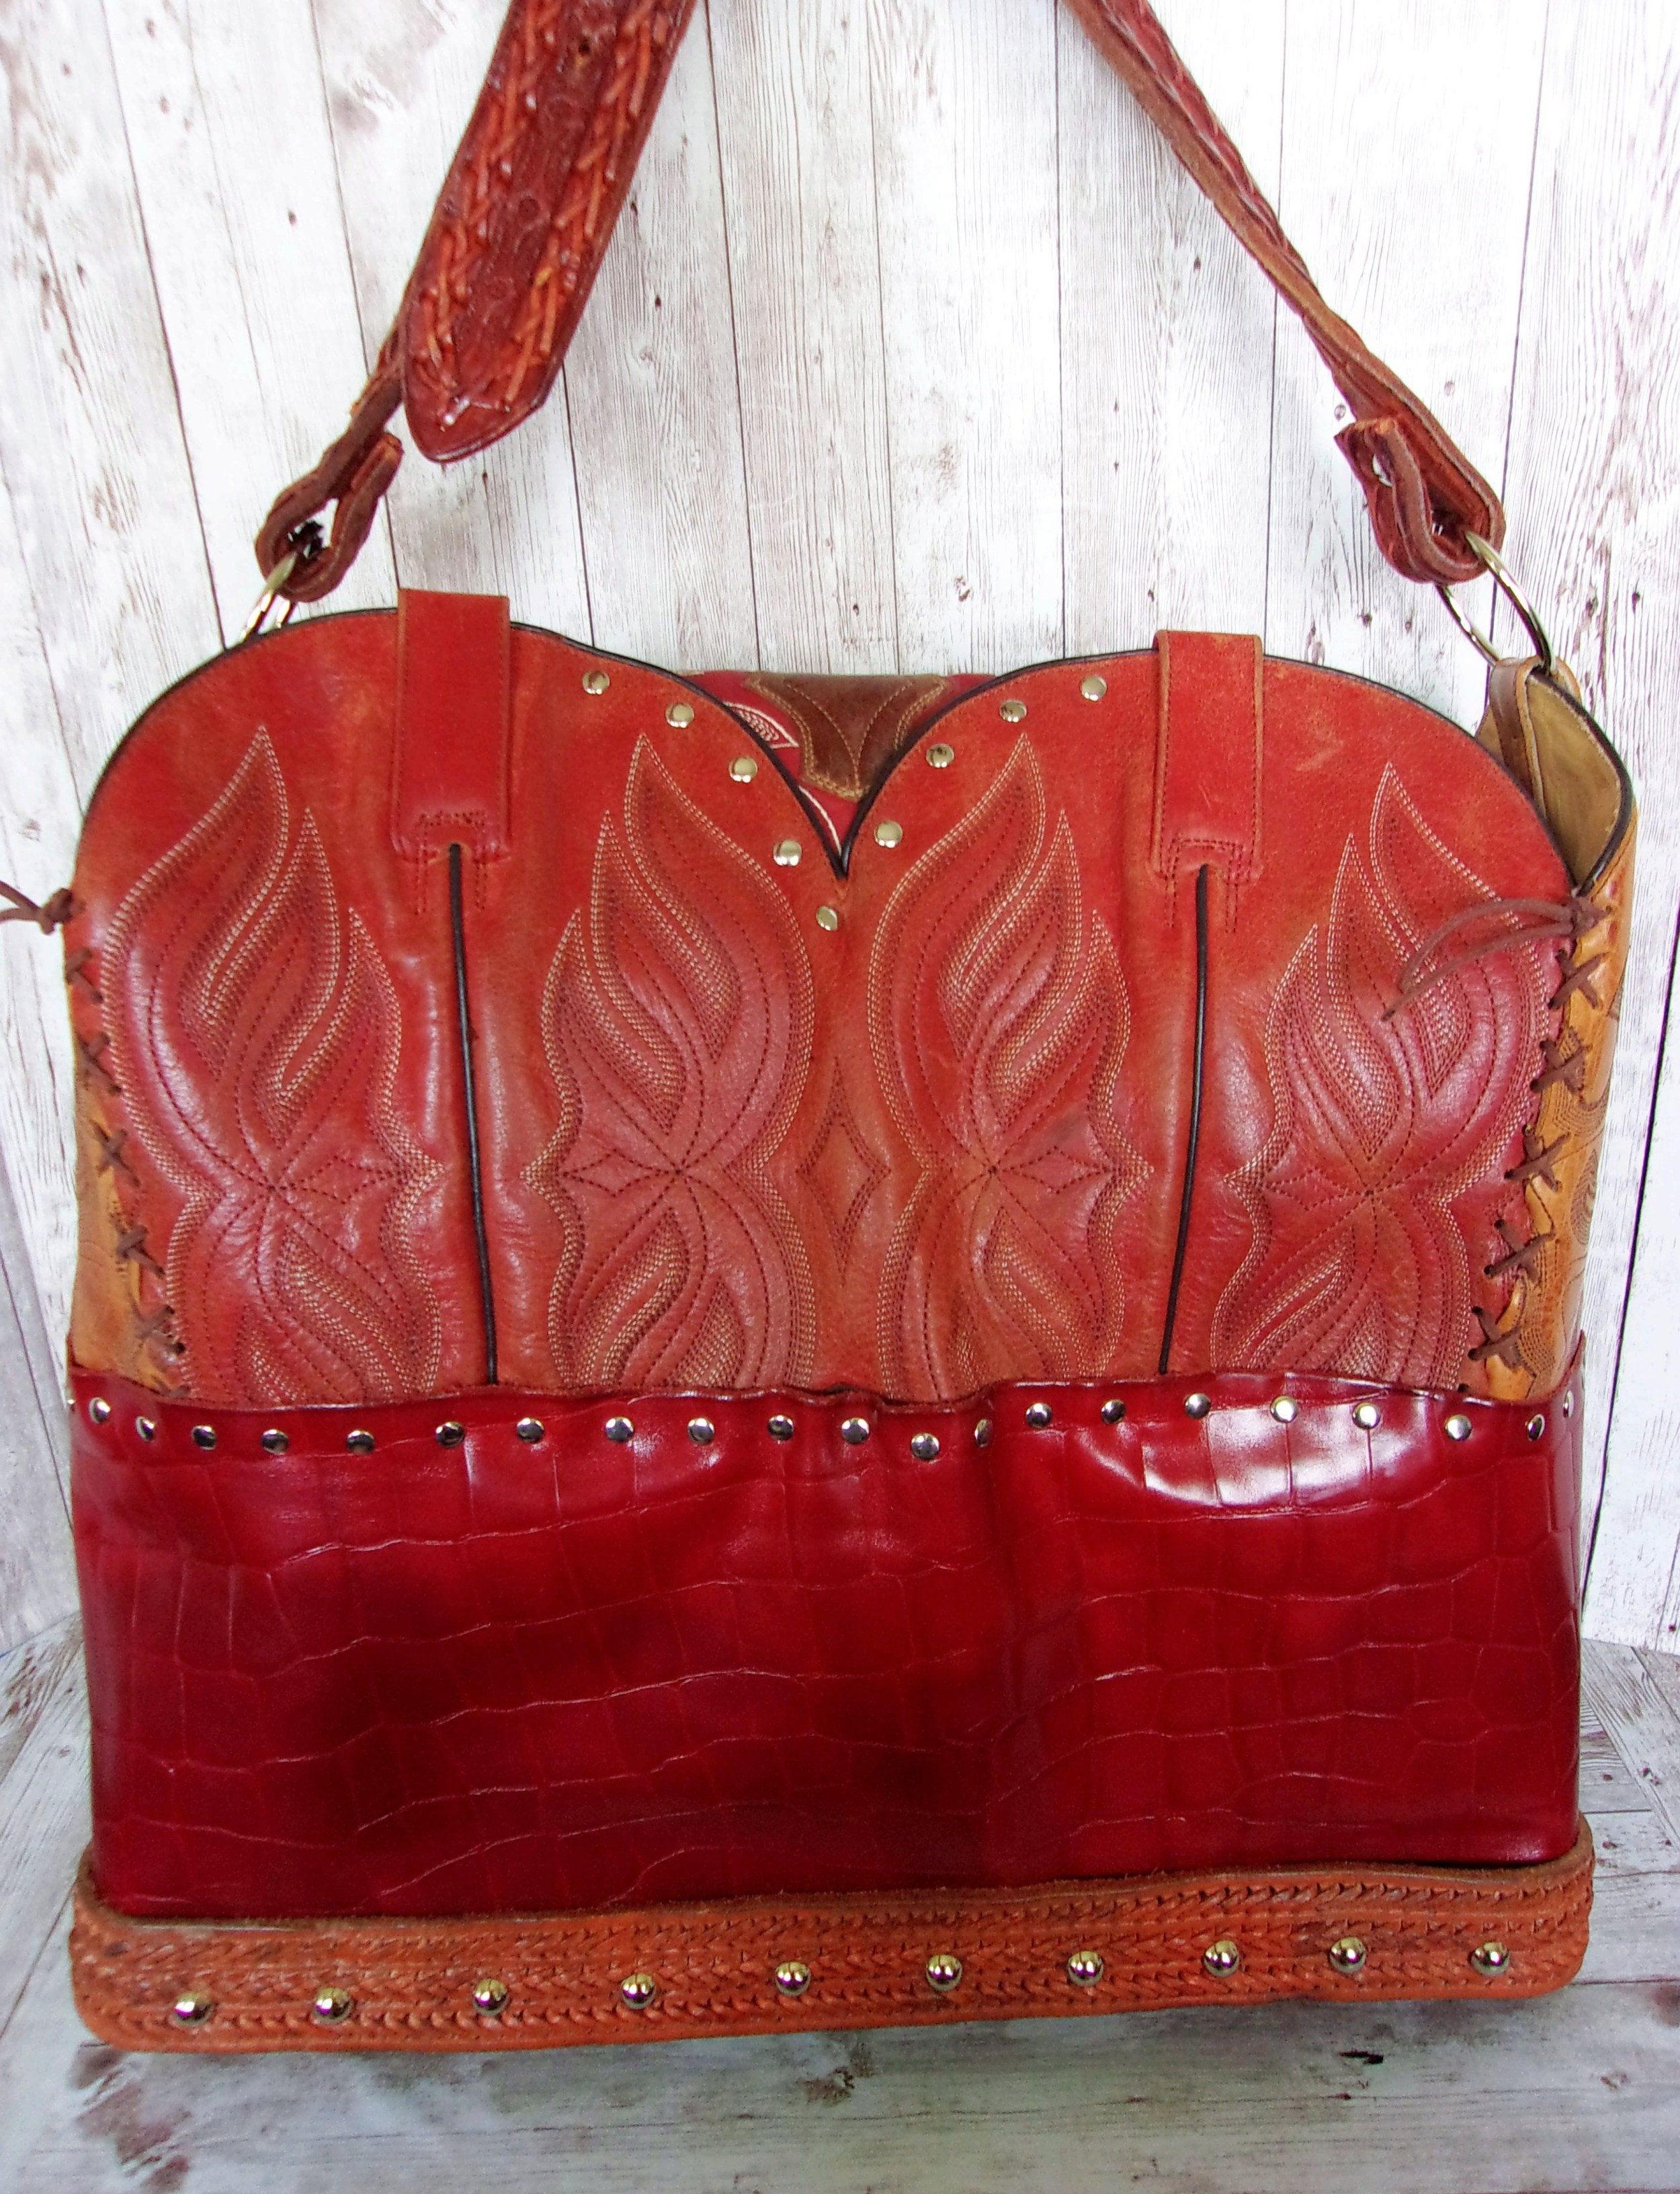 Western Laptop Tote - Extra Large Cowboy Boot Purse - Western Travel Bag LT32 cowboy boot purses, western fringe purse, handmade leather purses, boot purse, handmade western purse, custom leather handbags Chris Thompson Bags